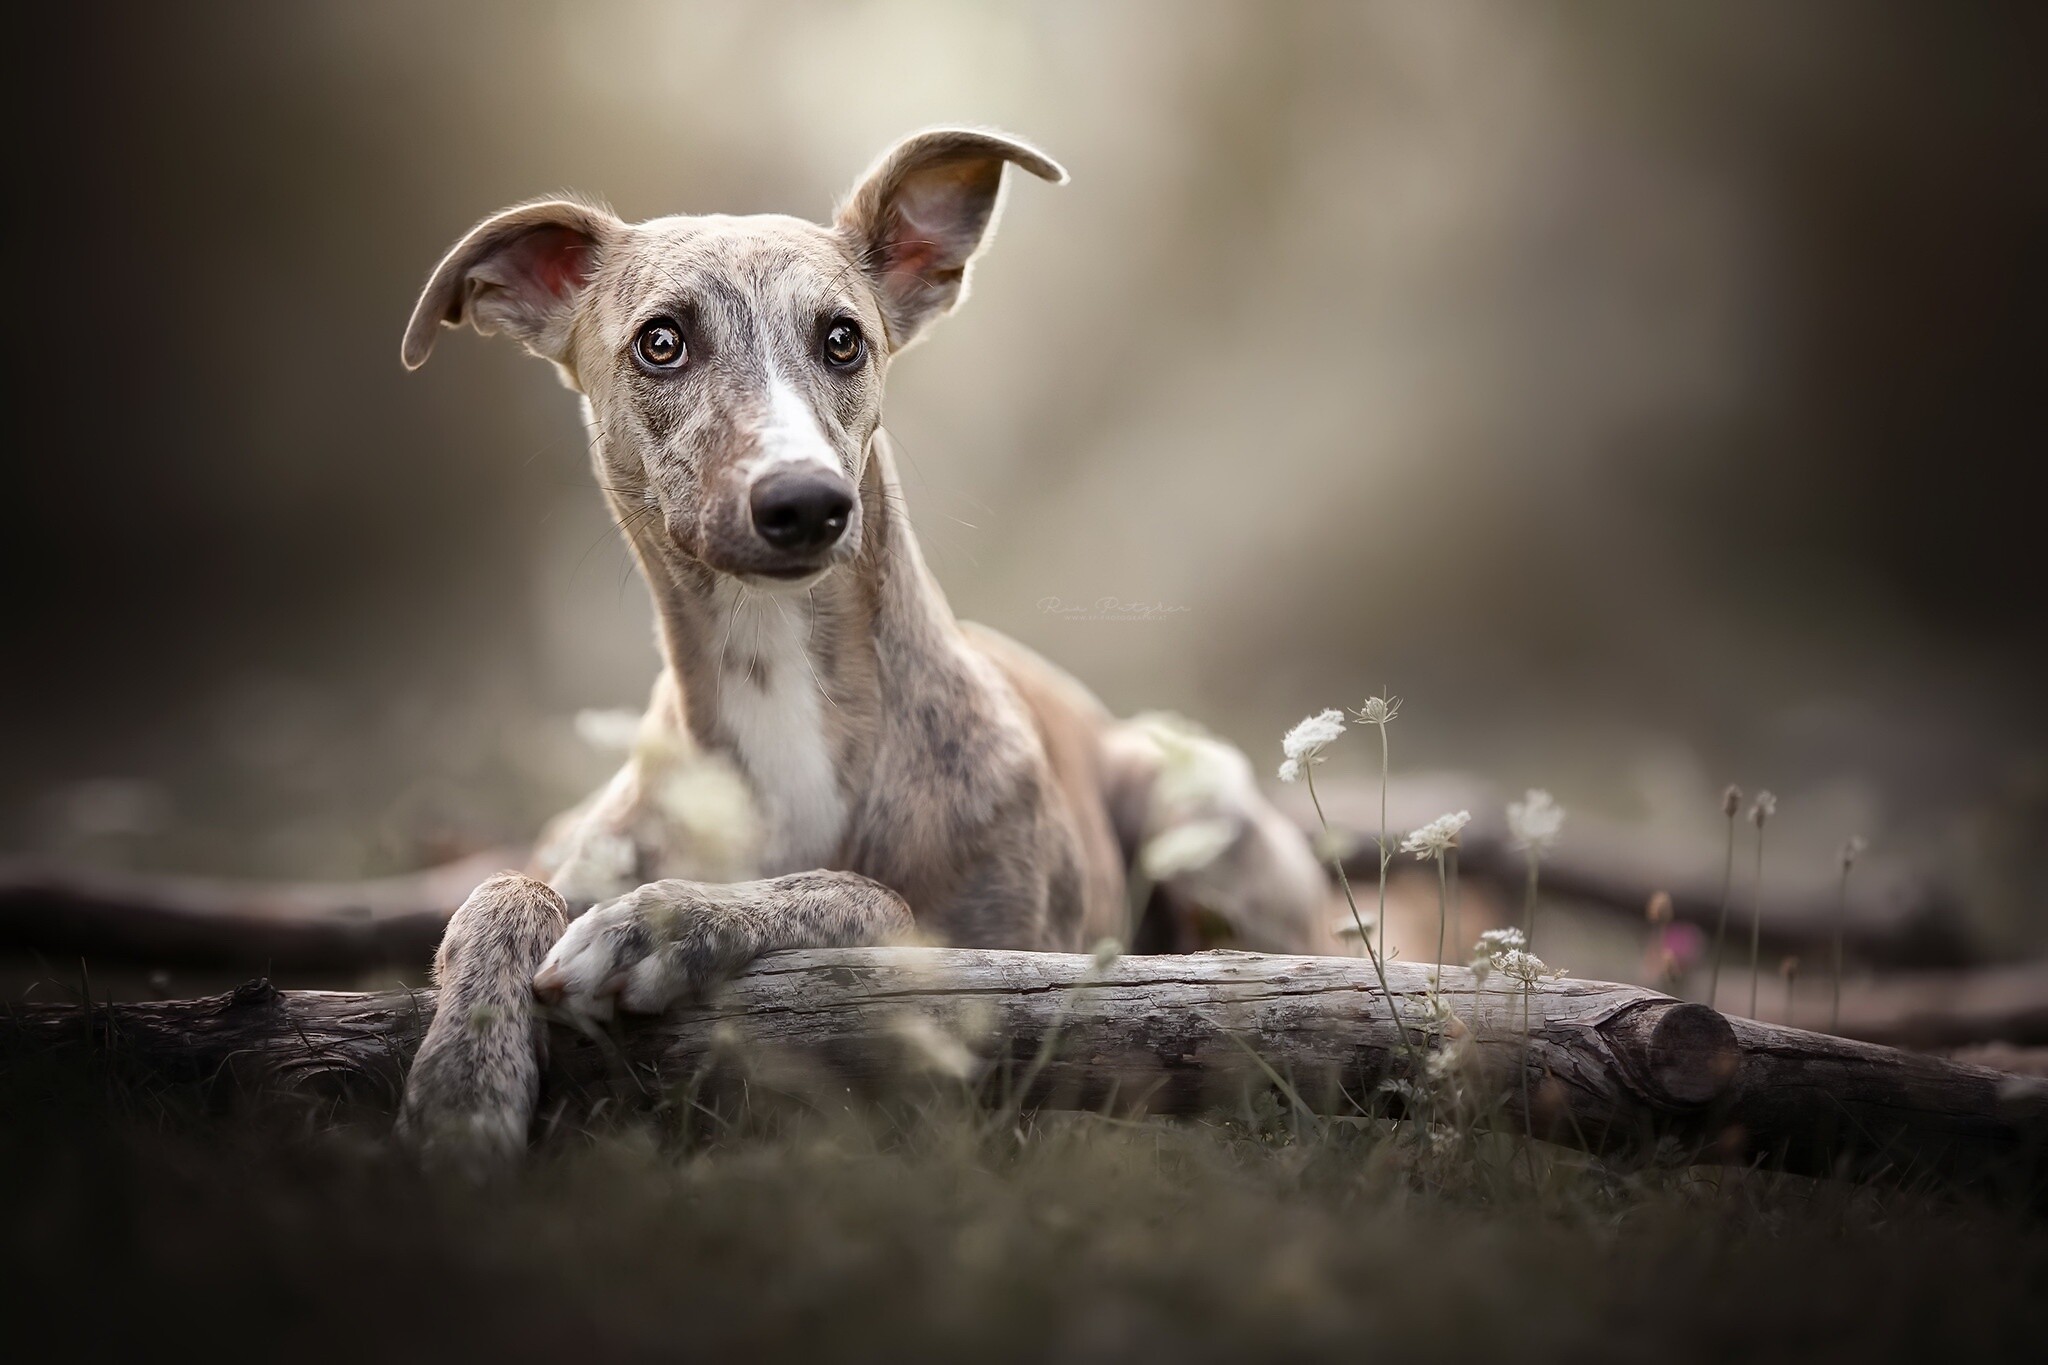 Whippet Dog: Whippets are sleek, mid-sized dogs that were bred for chasing small prey. 2050x1370 HD Wallpaper.